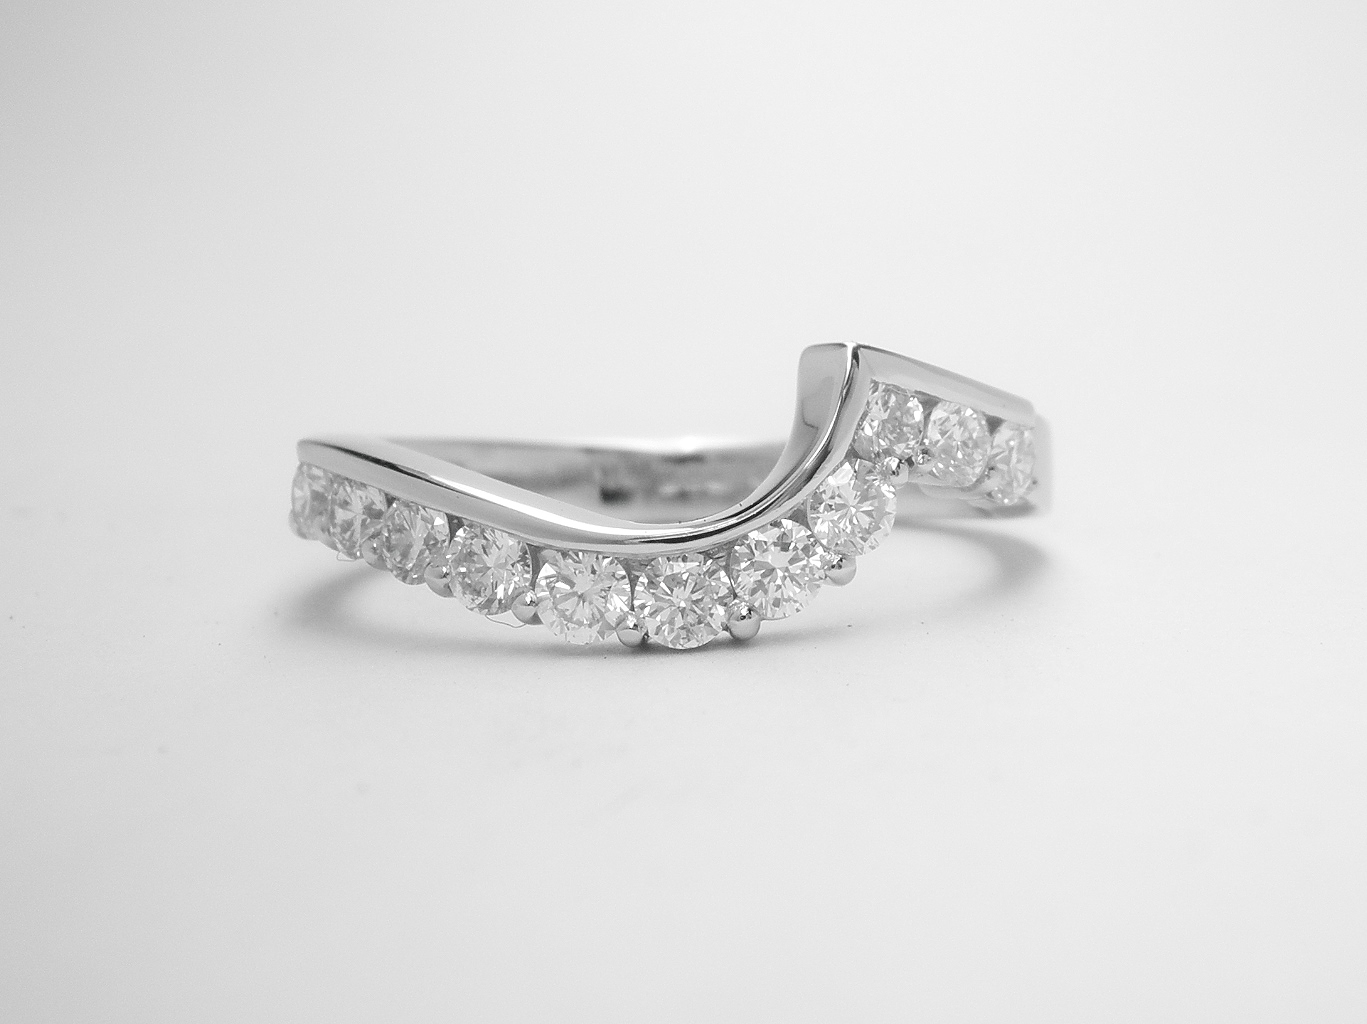 An 11 stone round brilliant cut diamond part channel set ring mounted in platinum and shaped to fit around a 2 stone diamond wrap around ring.